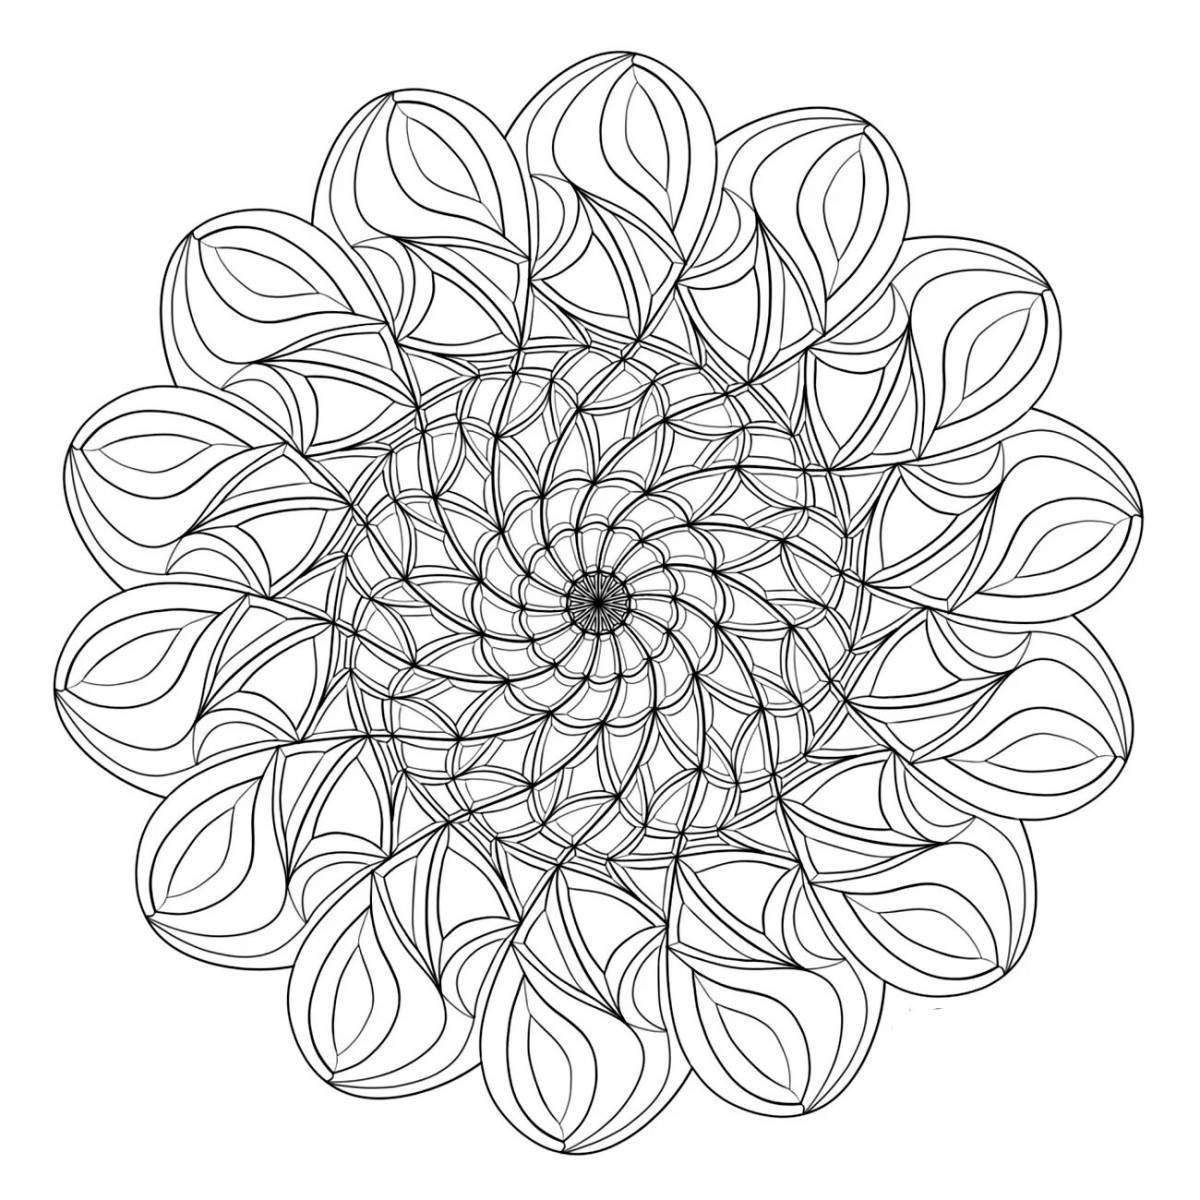 Amazing Coloring Pages Antistress Mandalas for Adults en